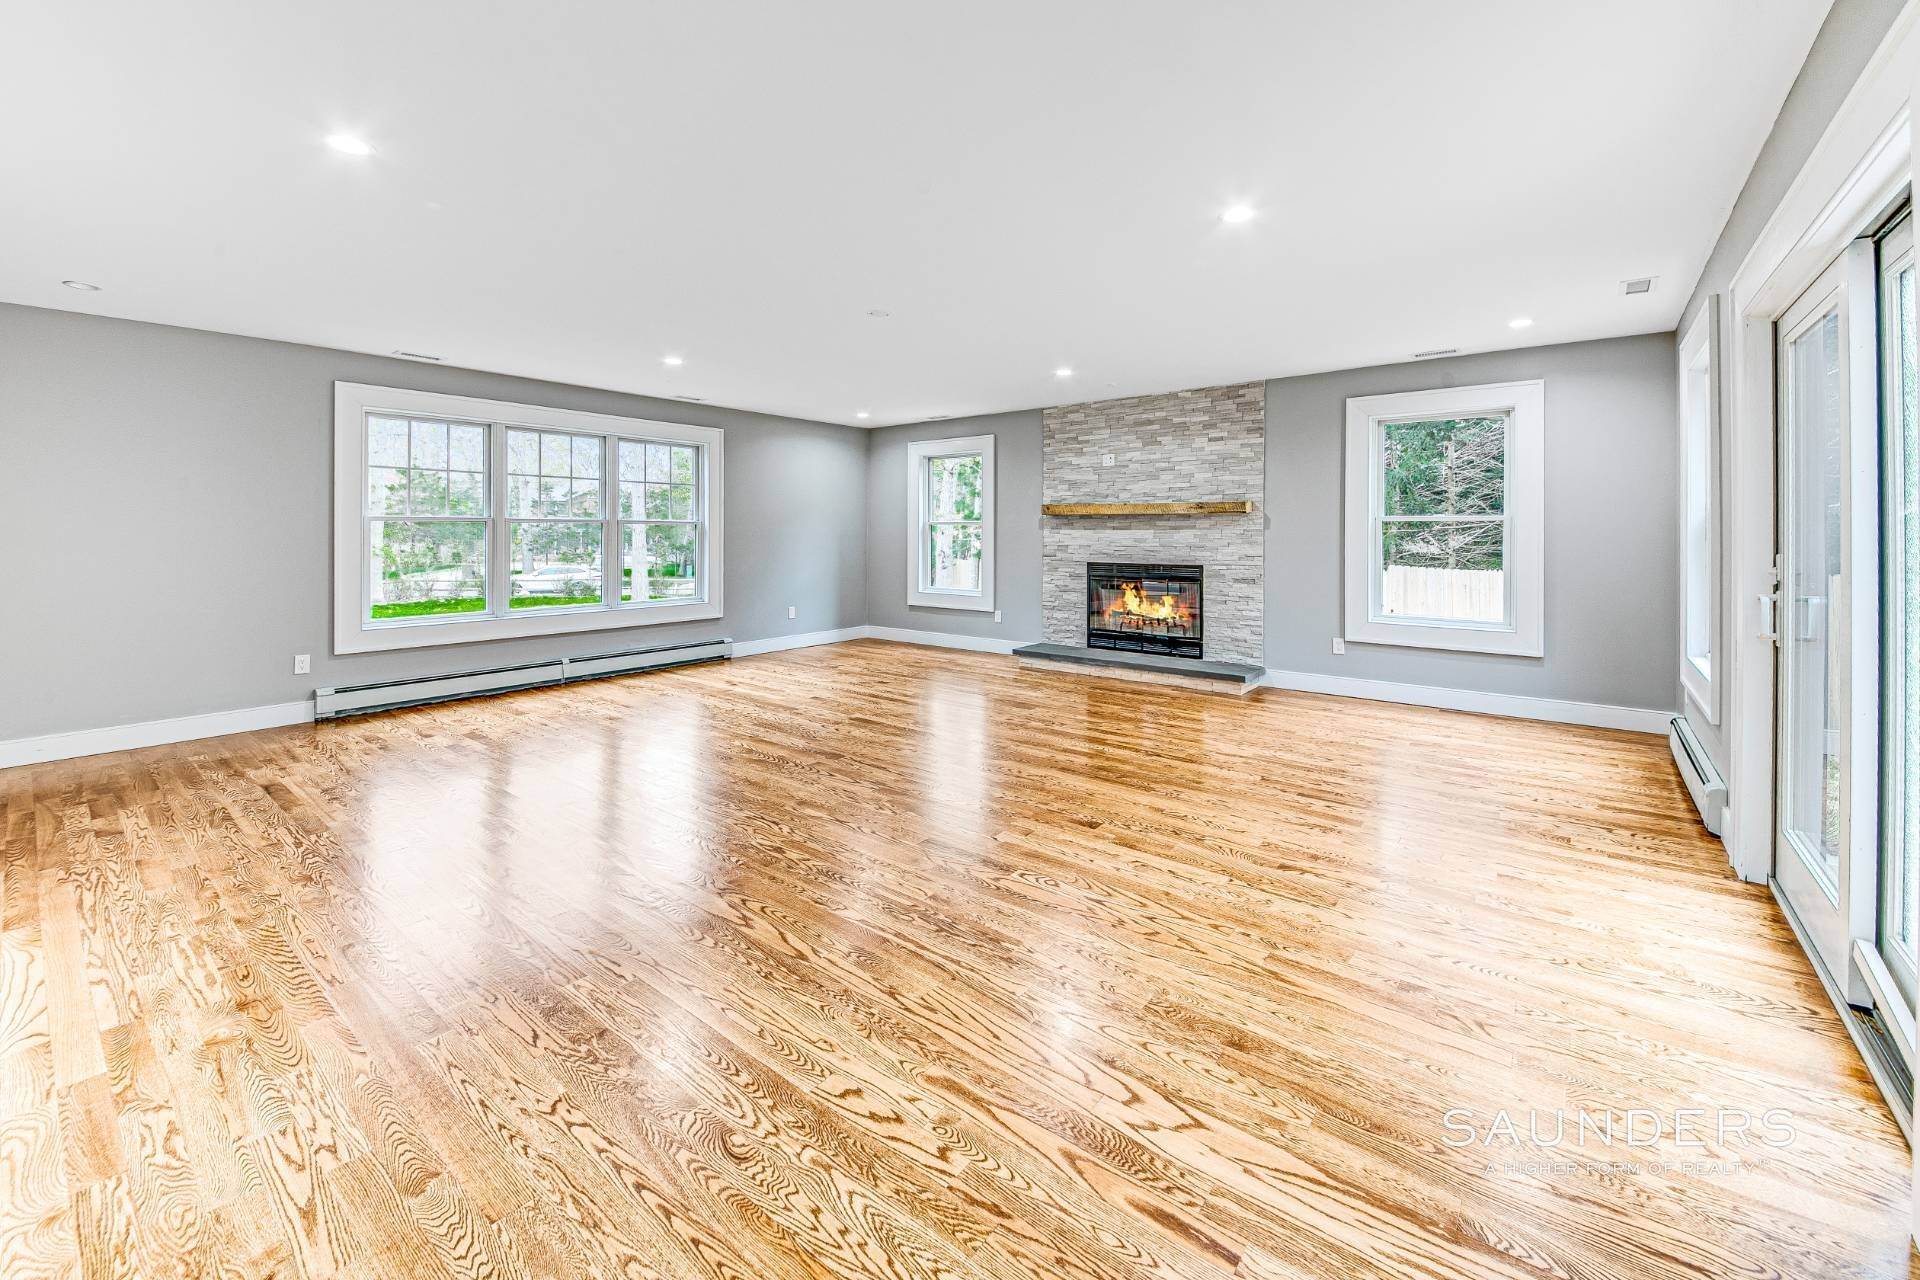 3. Single Family Homes for Sale at Beautifully Renovated Move In Ready Home 15 Sycamore Drive, East Hampton, NY 11937